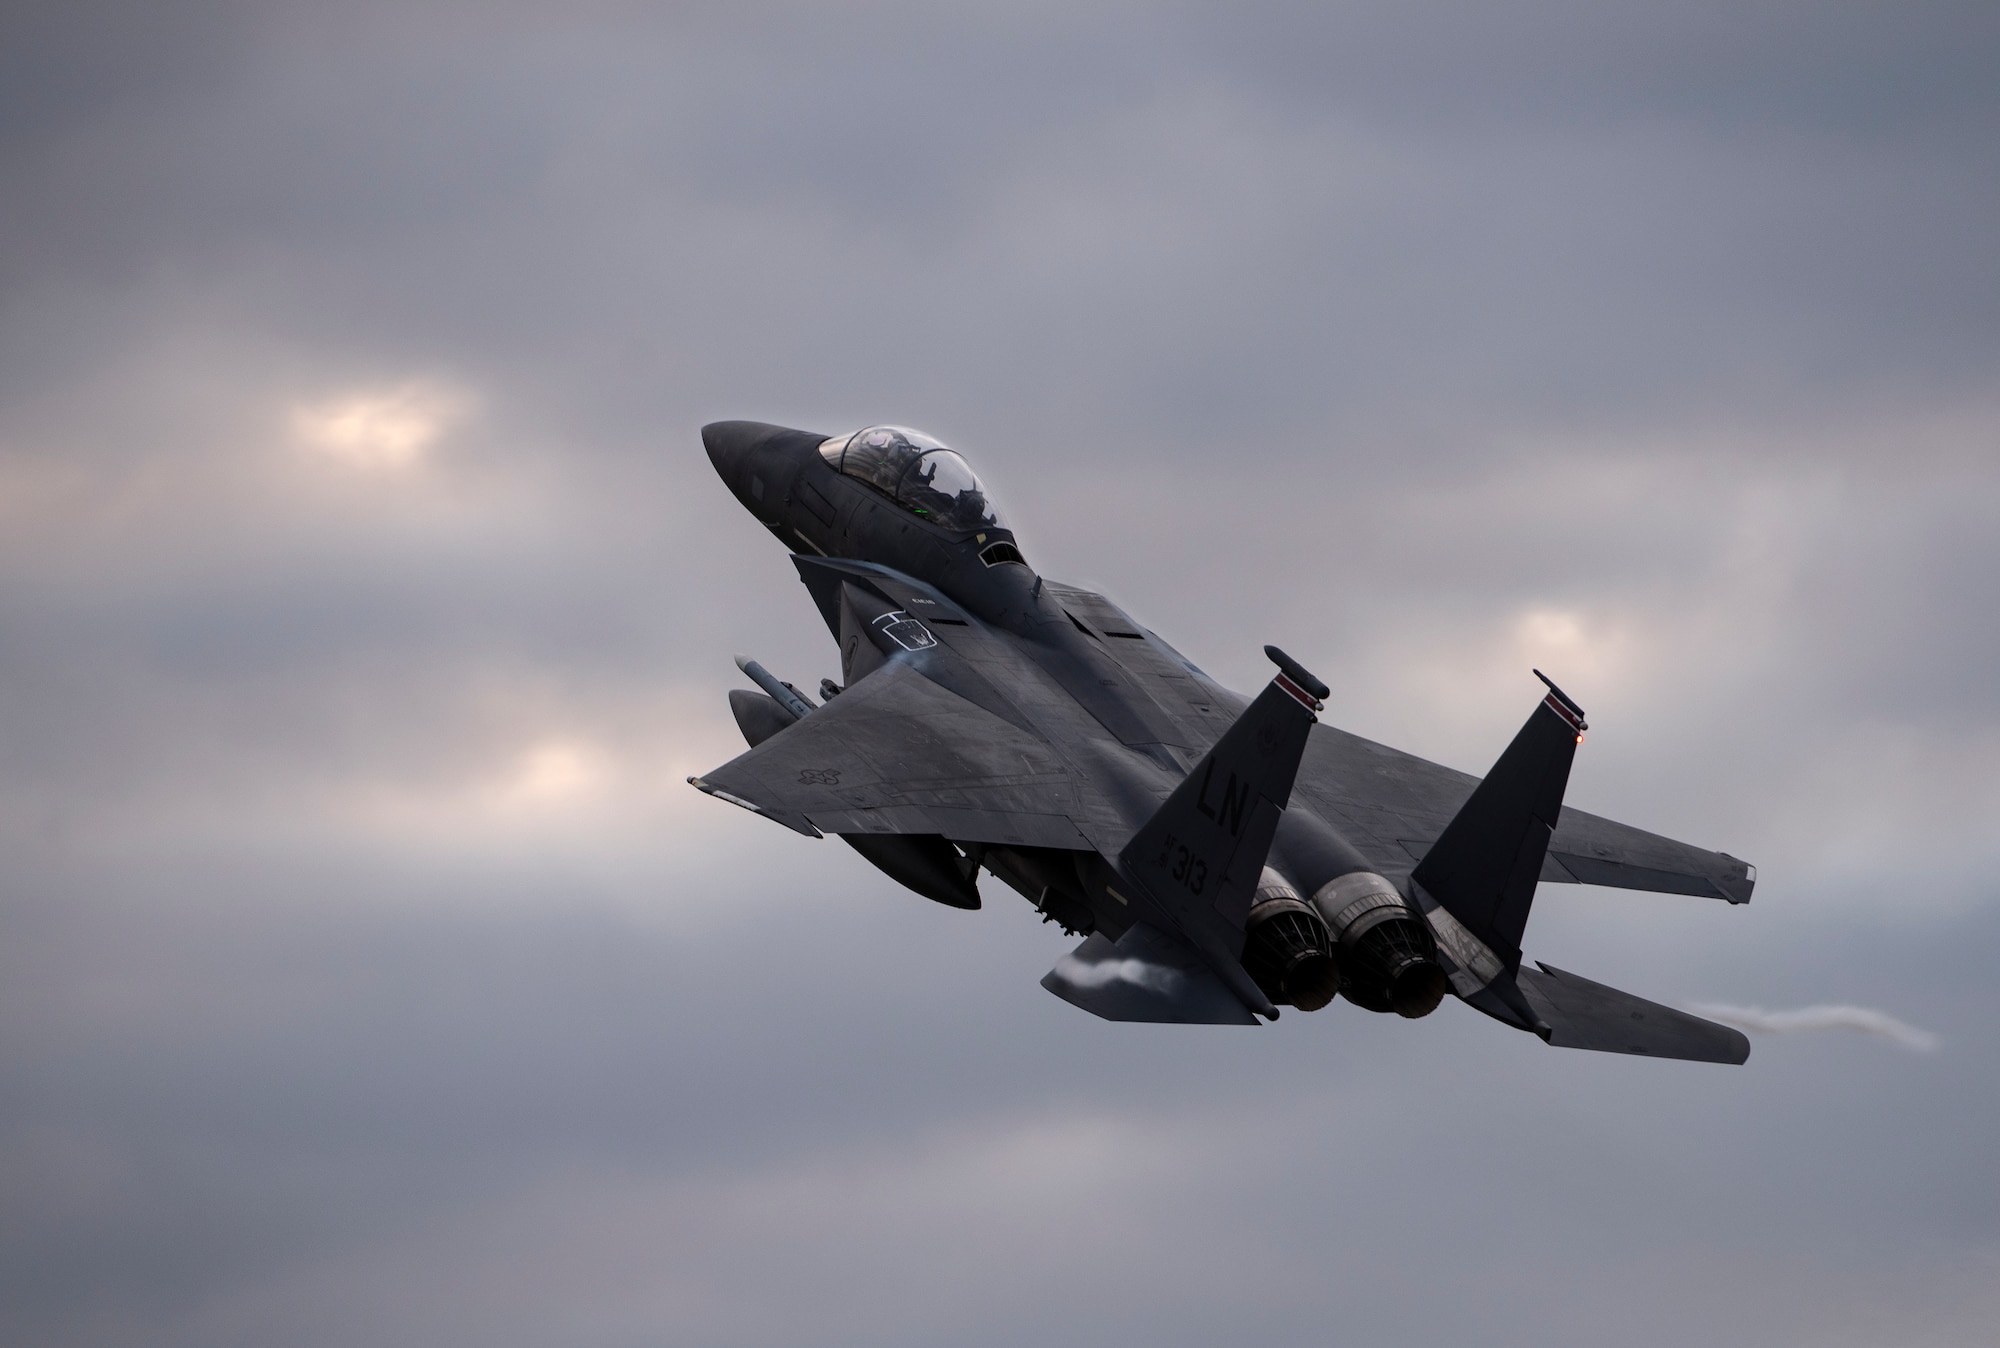 An F-15E Strike Eagle assigned to the 494th Fighter Squadron flies overhead in support of exercise Point Blank 20-4 at Royal Air Force Lakenheath, England, Sept. 10, 2020.  Exercises like Point Blank increase interoperability and collective readiness with other NATO forces, deter potential adversaries and ensure the skies above the European theater remain sovereign. (U.S. Air Force photo by Airman 1st Class Jessi Monte)